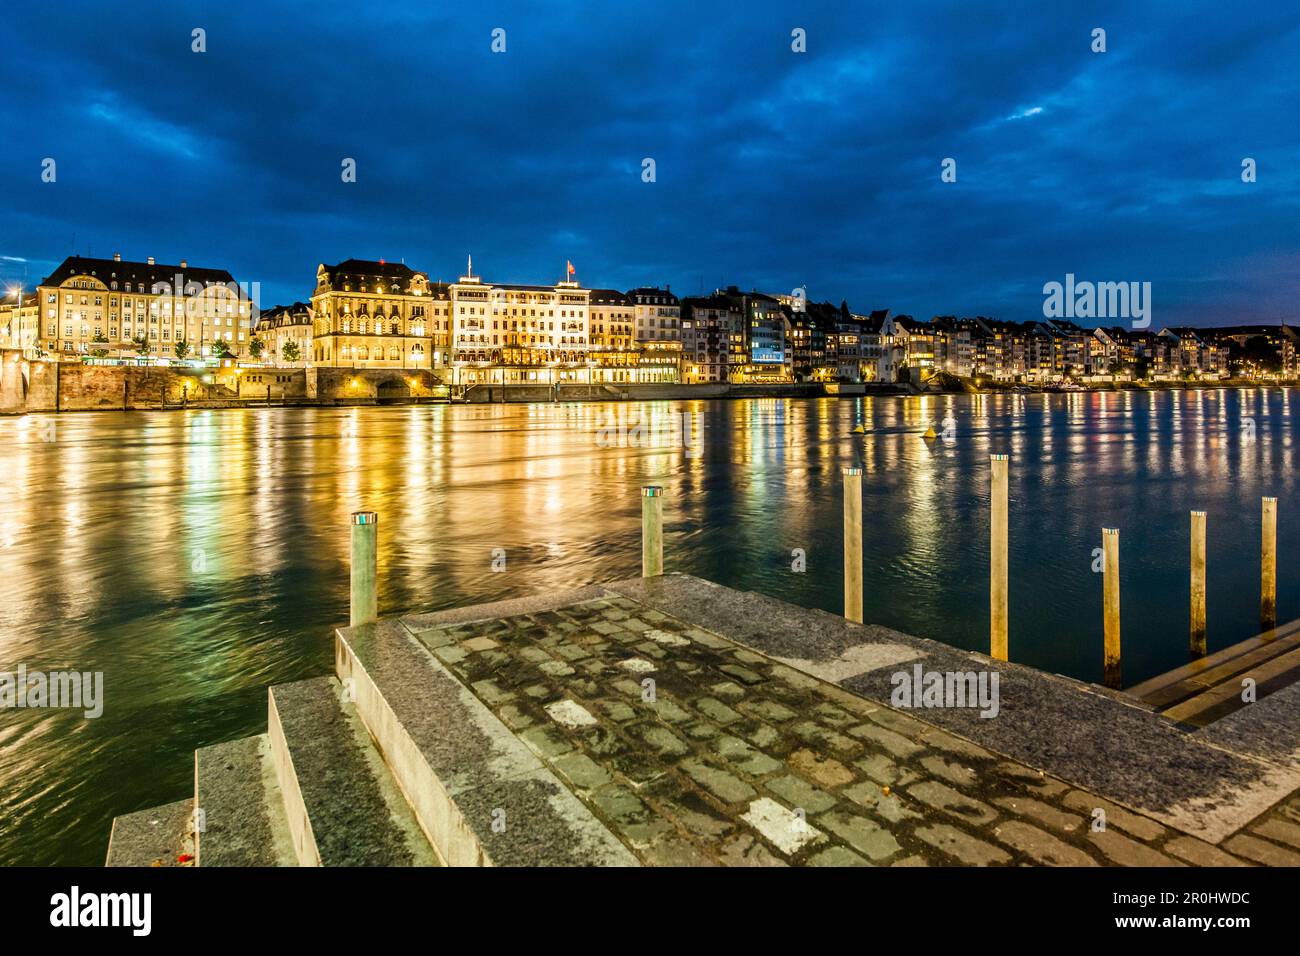 View over the river Rhine to a hotel in the evening, Basel, Canton of Basel-Stadt, Switzerland Stock Photo